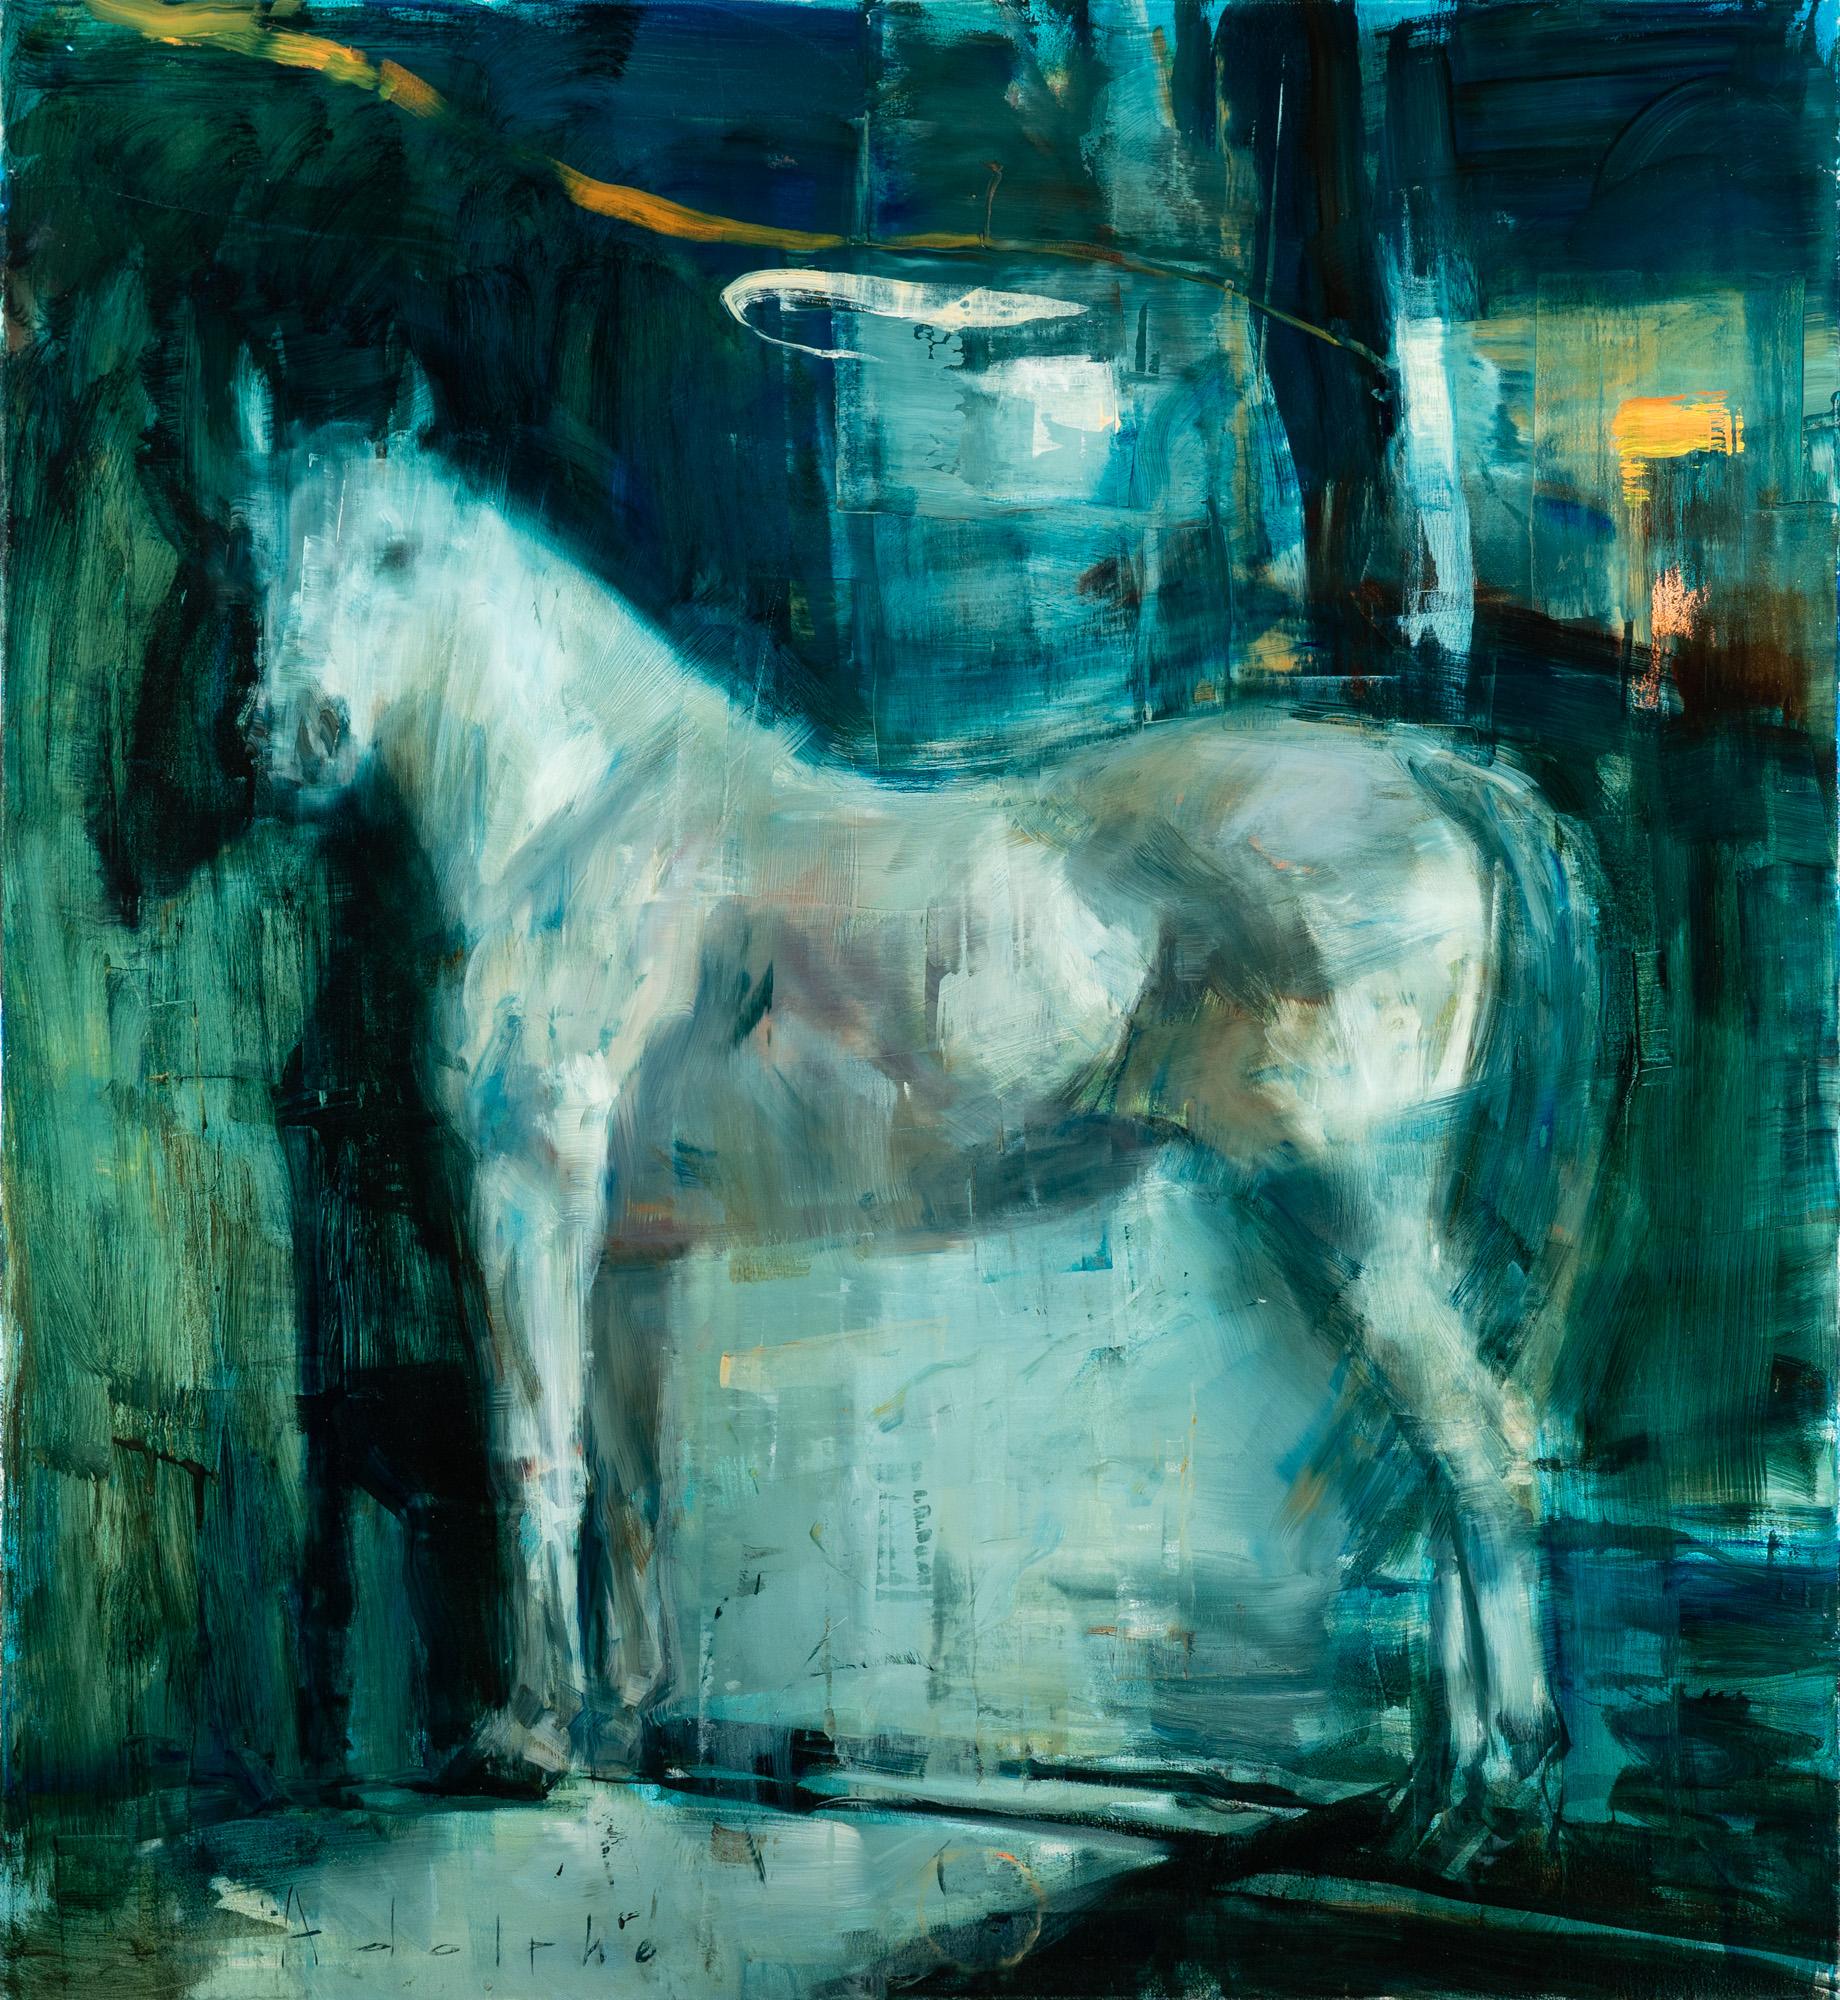 Joseph Adolphe Animal Painting - "Equus No. 10" Abstract Horse Portrait Oil on Canvas Painting